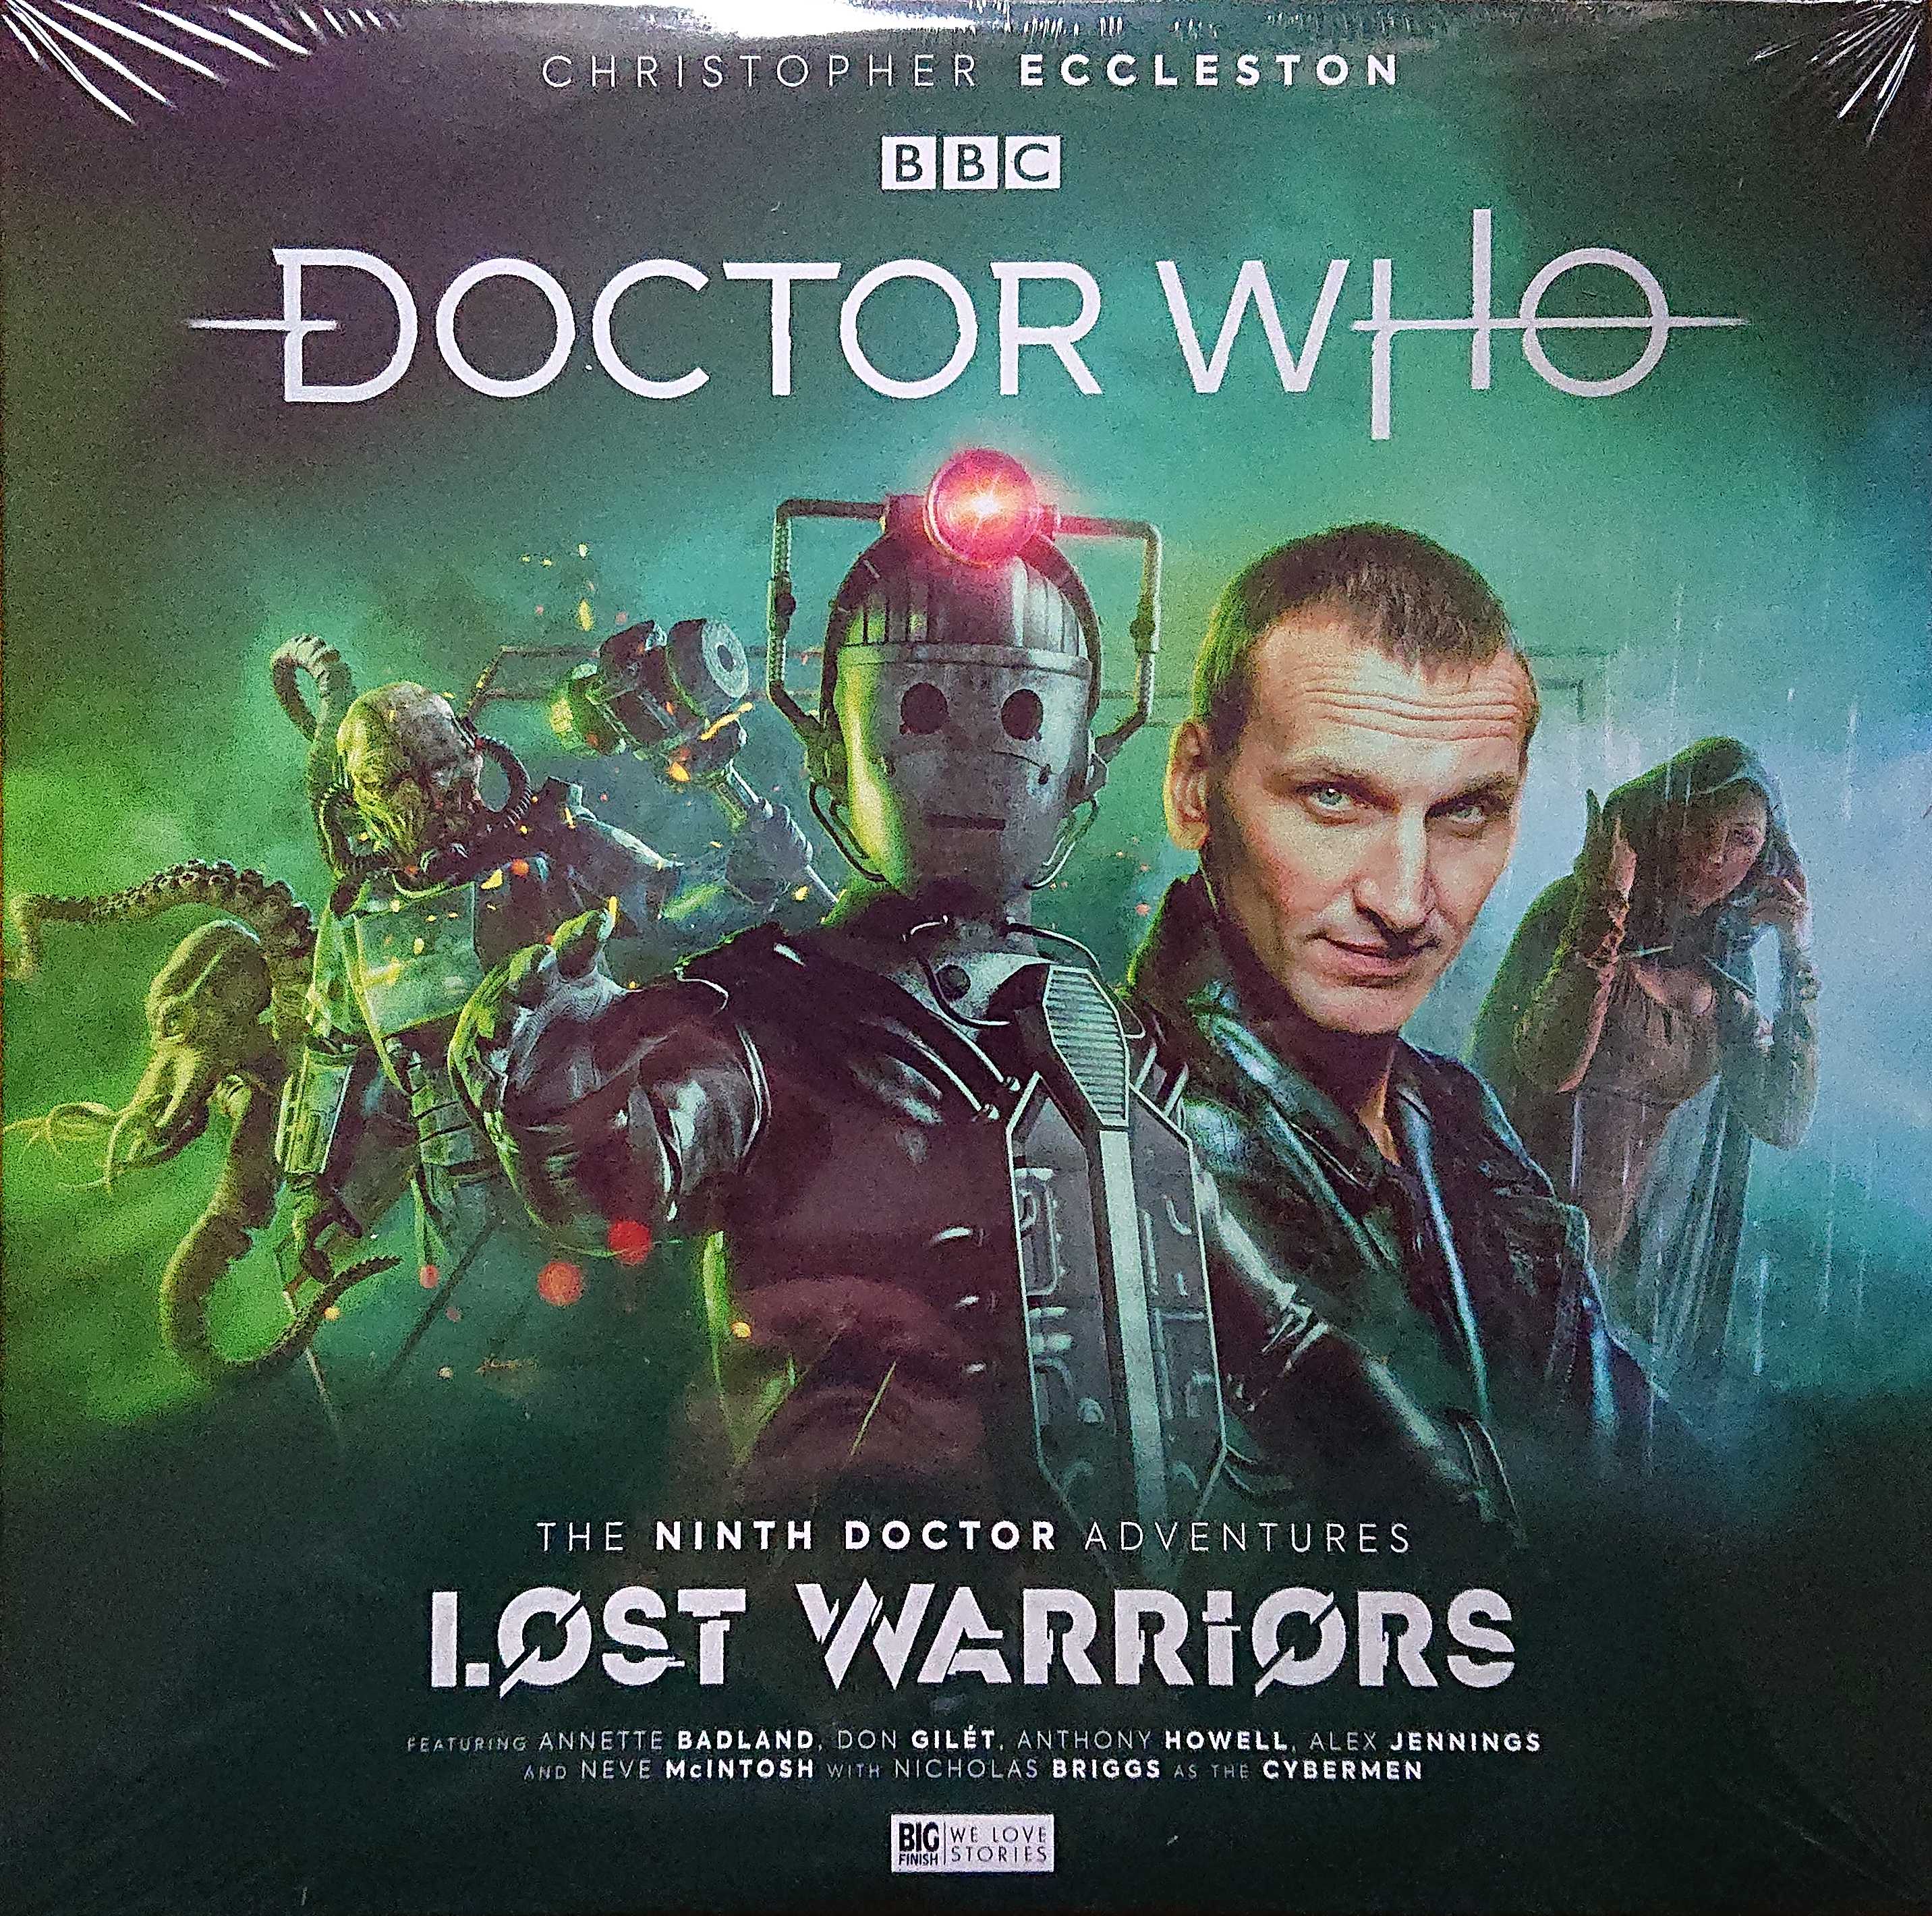 Picture of BFPDW9TH03V Doctor Who - Lost warriors by artist James Kettle / Lizzie Hopley / John Dorney from the BBC records and Tapes library